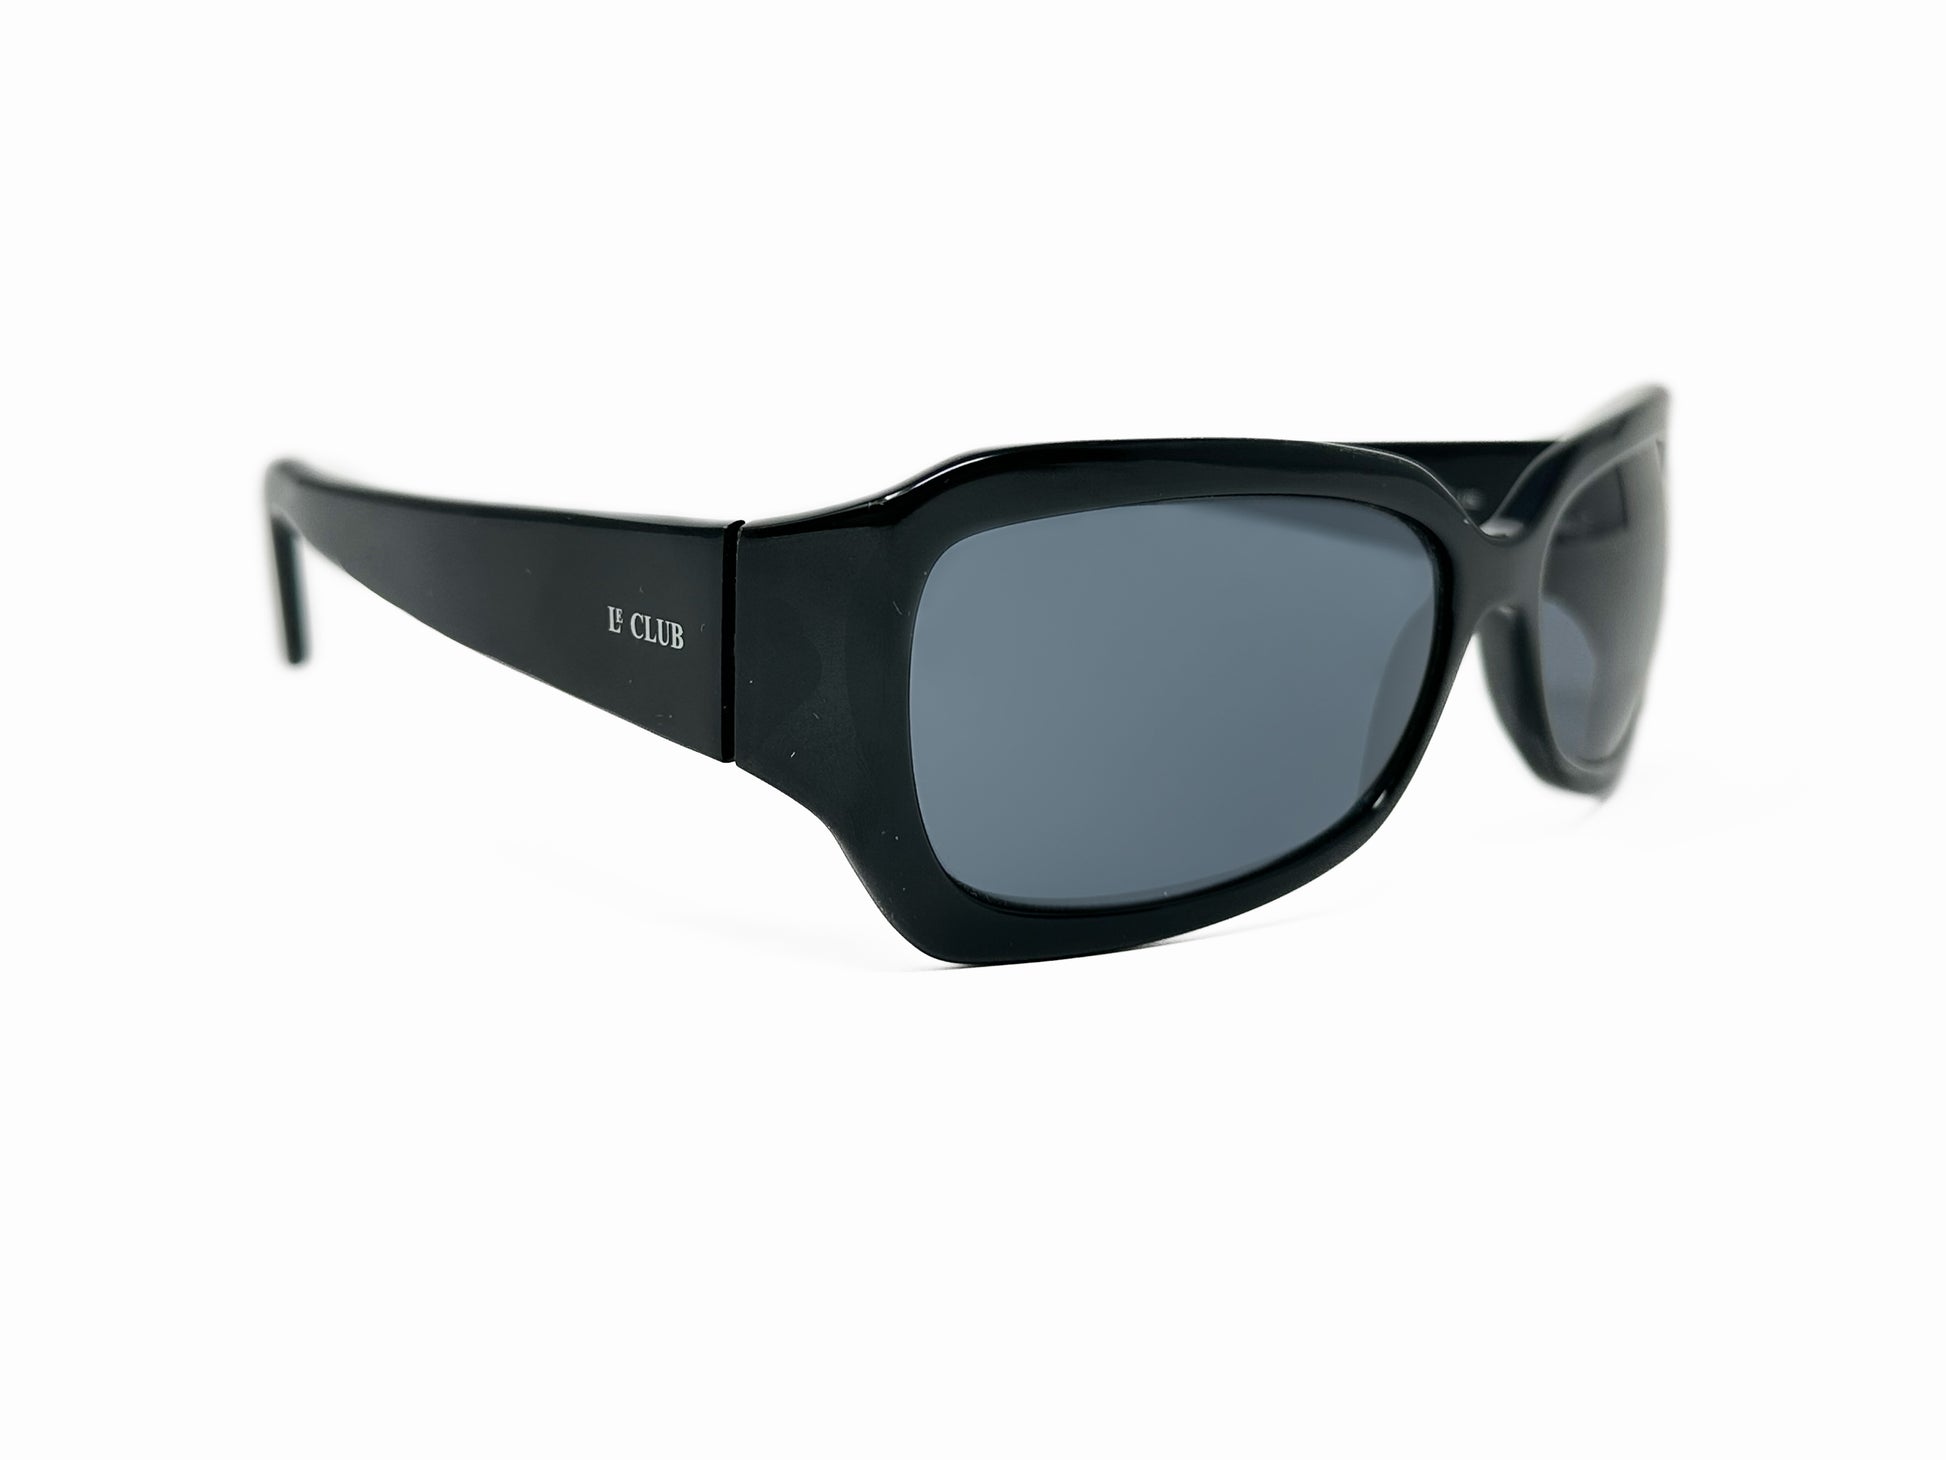 Le Club butterfly-rectangular, acetate sunglass. Model: 2489B. Color: W044 - Black with grey lenses. Side view.